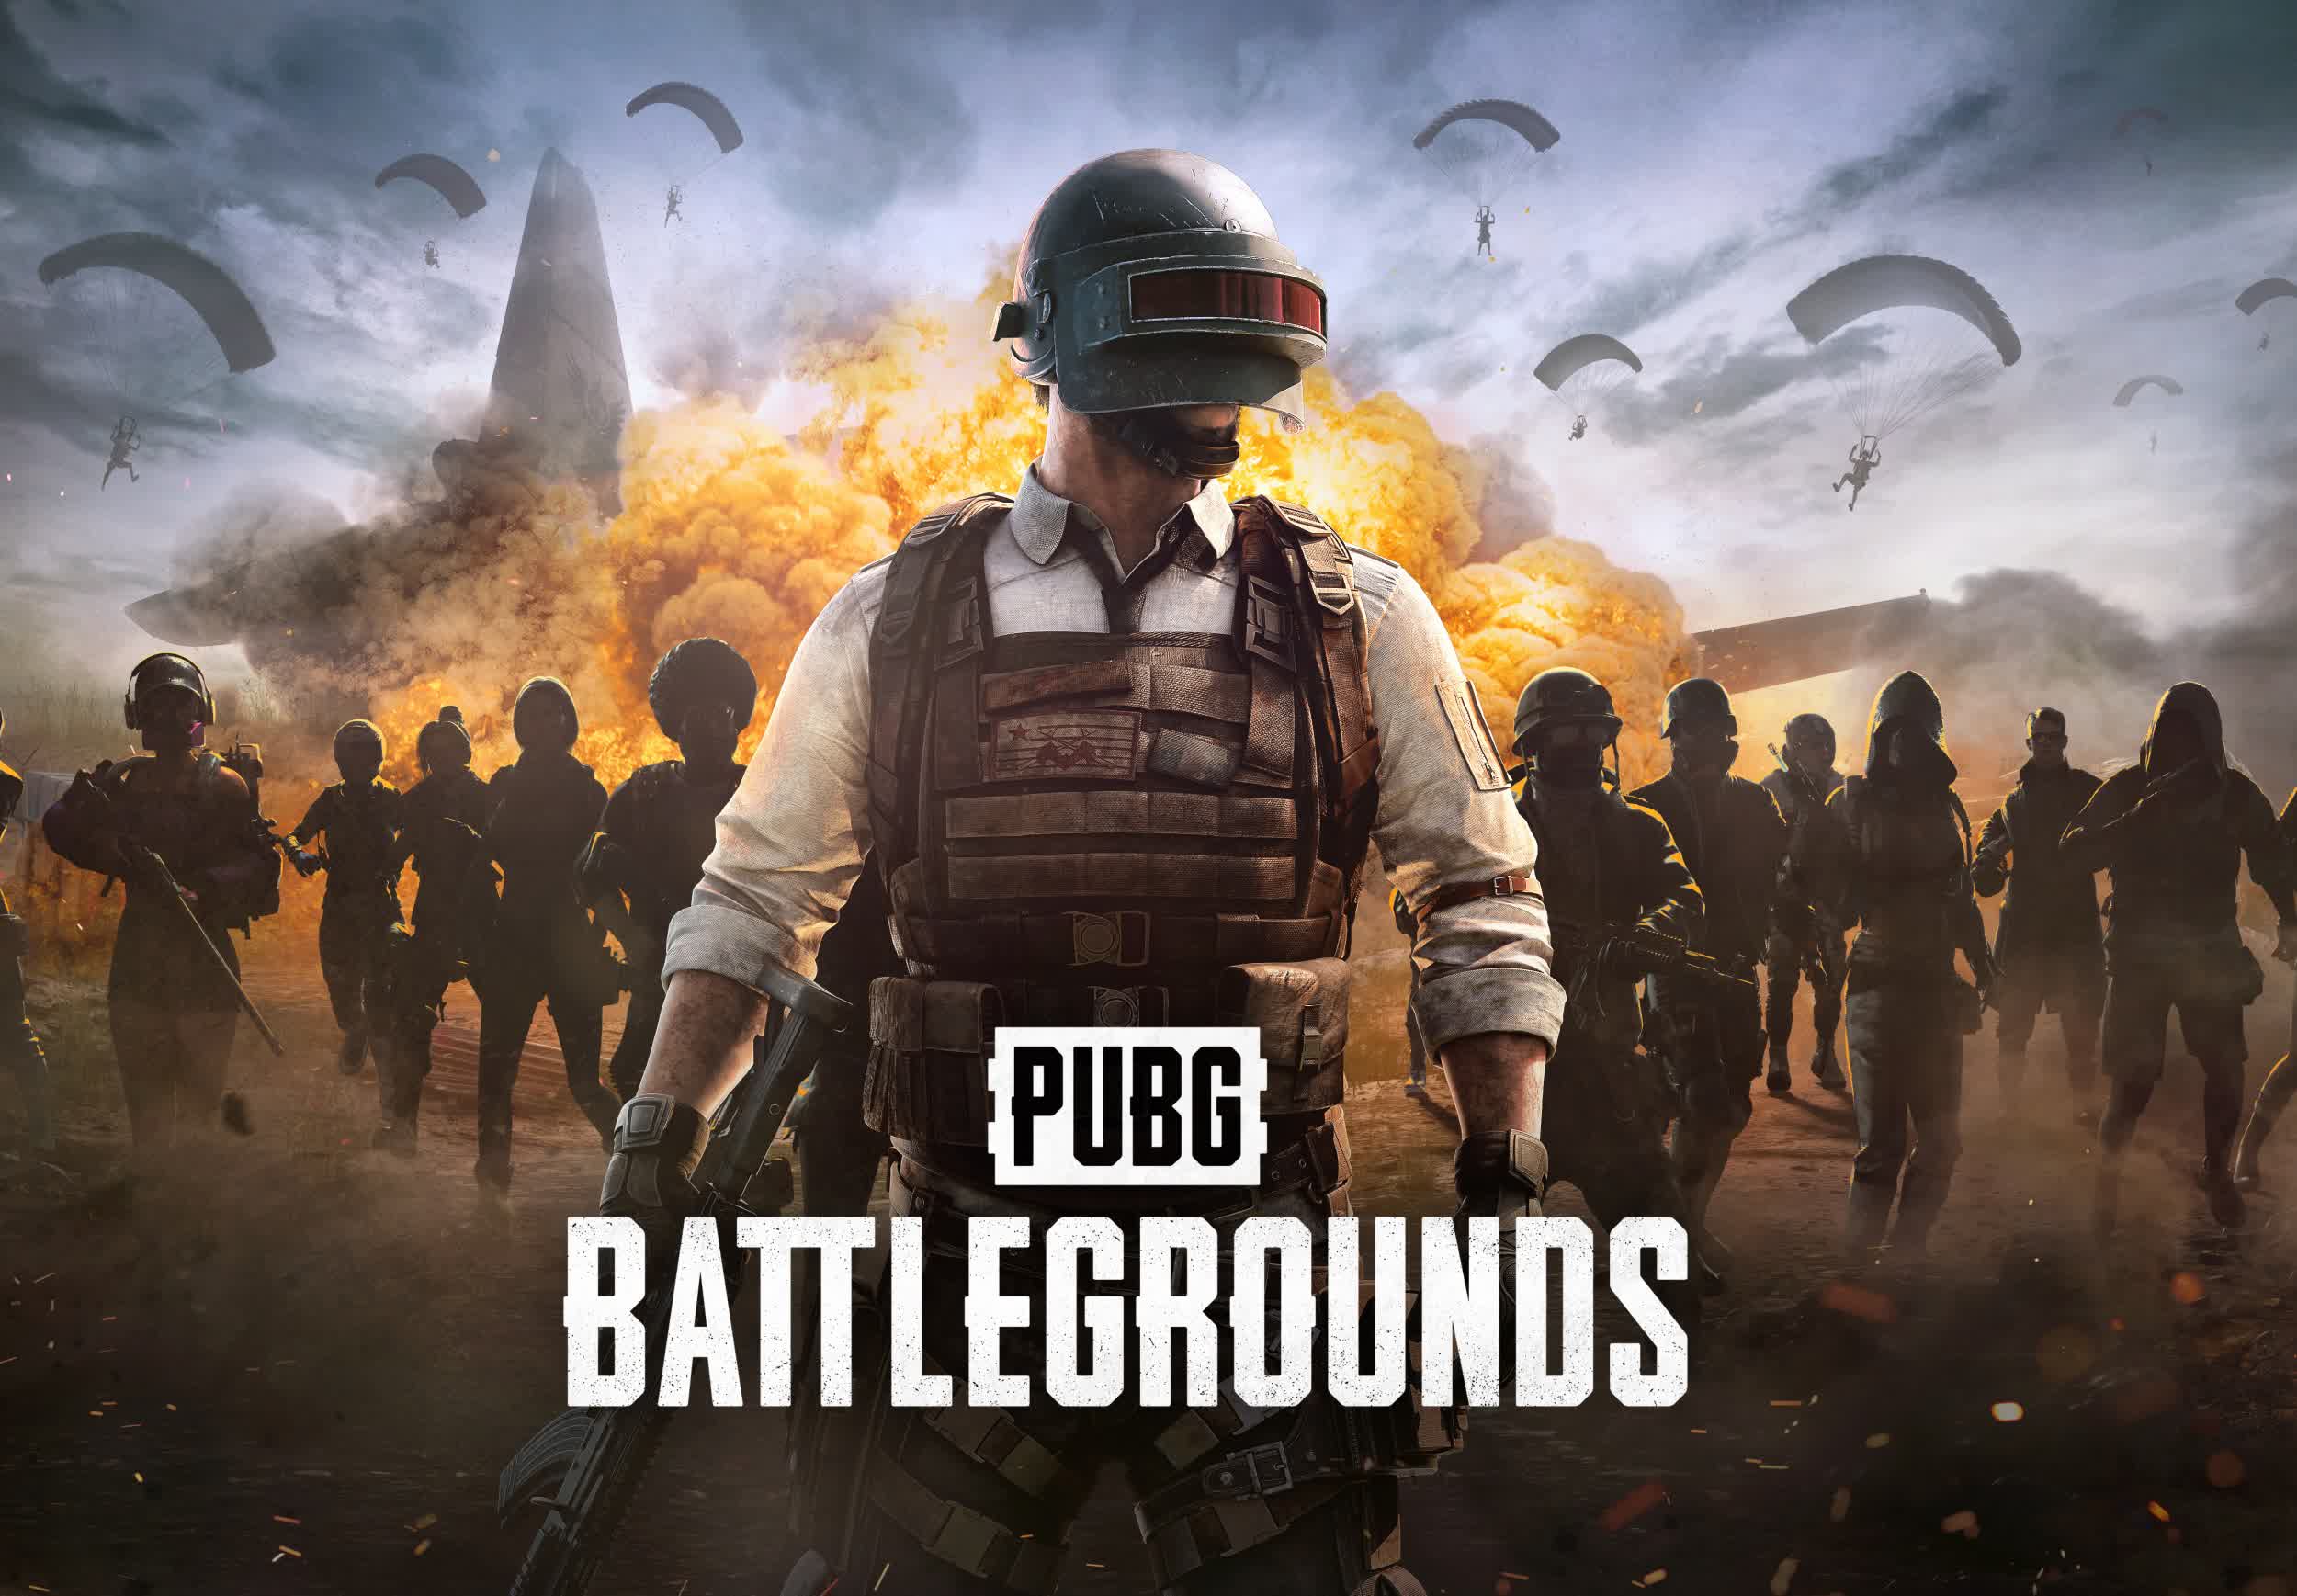 PUBG experiences massive player growth after switching to free-to-play model thumbnail